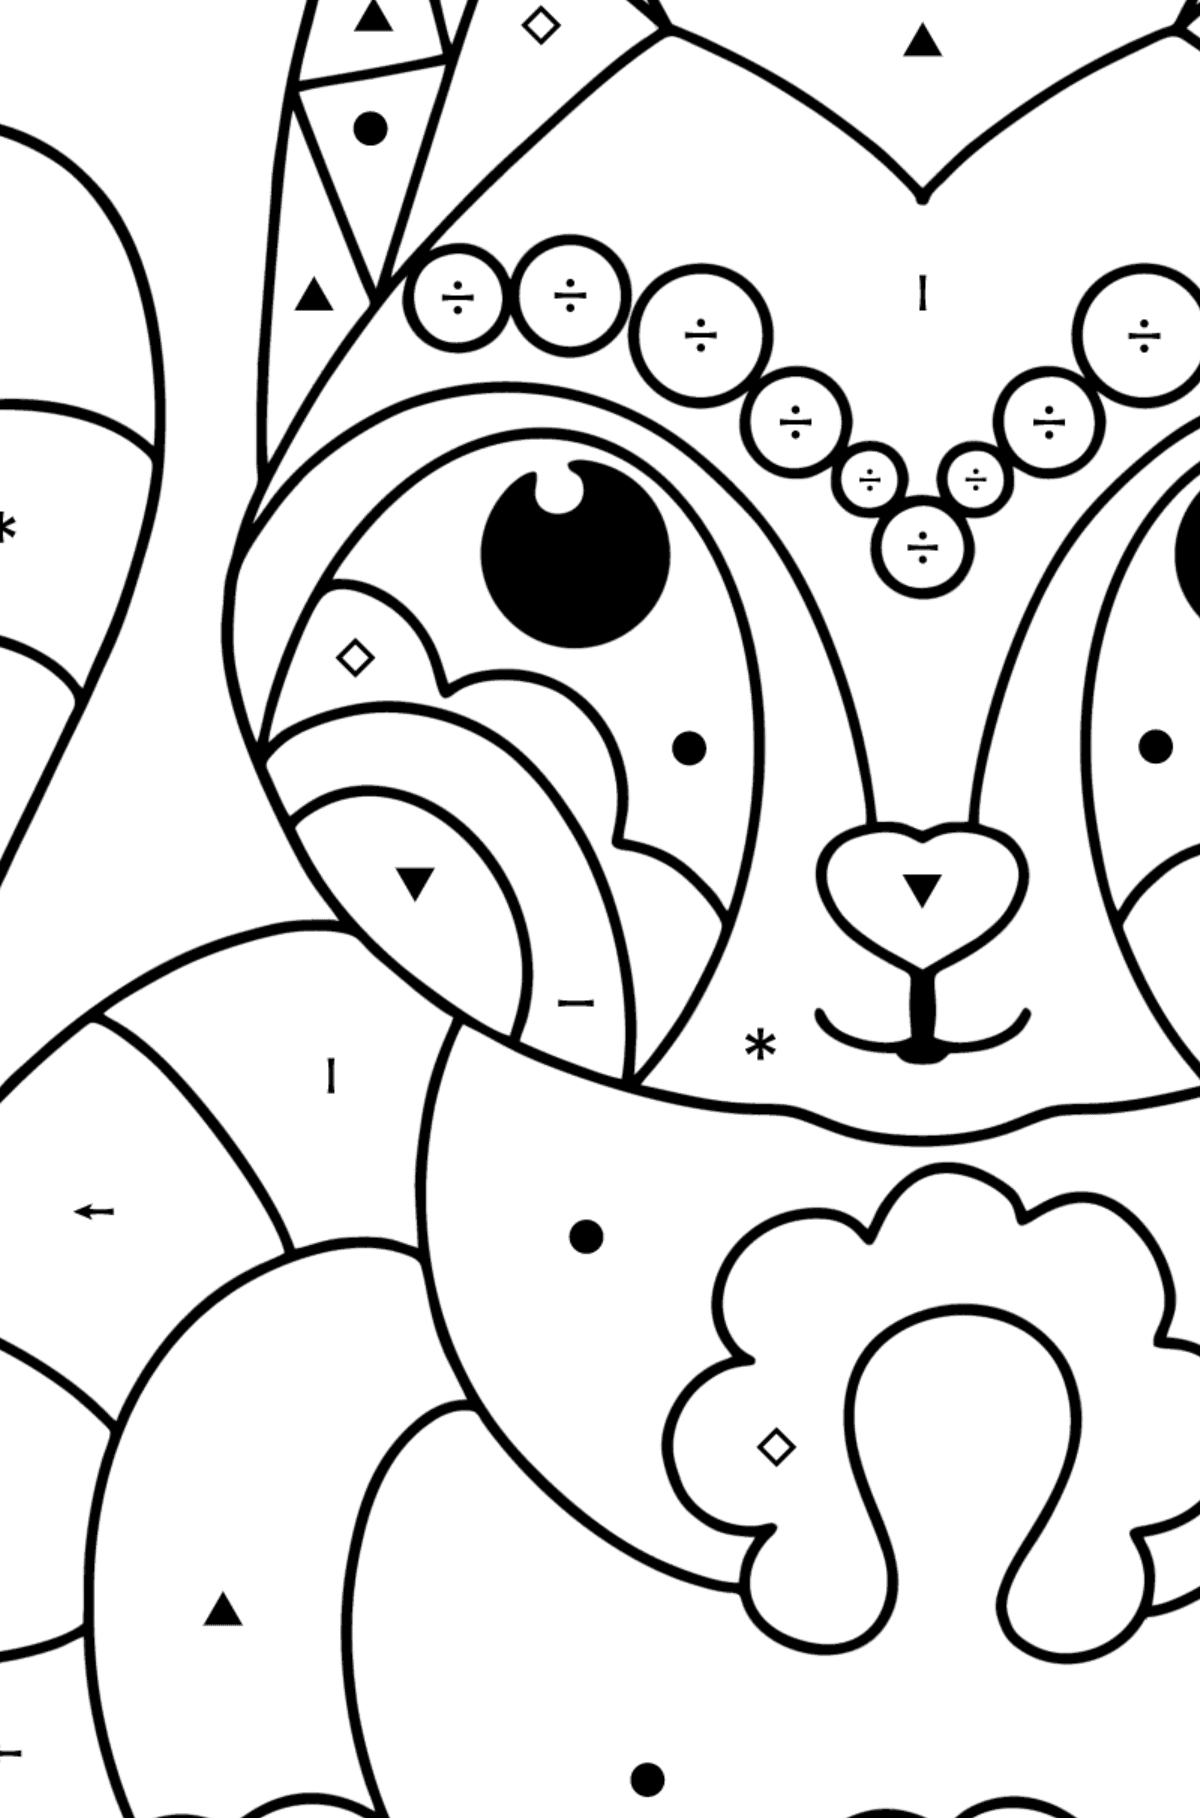 Coloring page Anti stress animals - raccoon - Coloring by Symbols for Kids